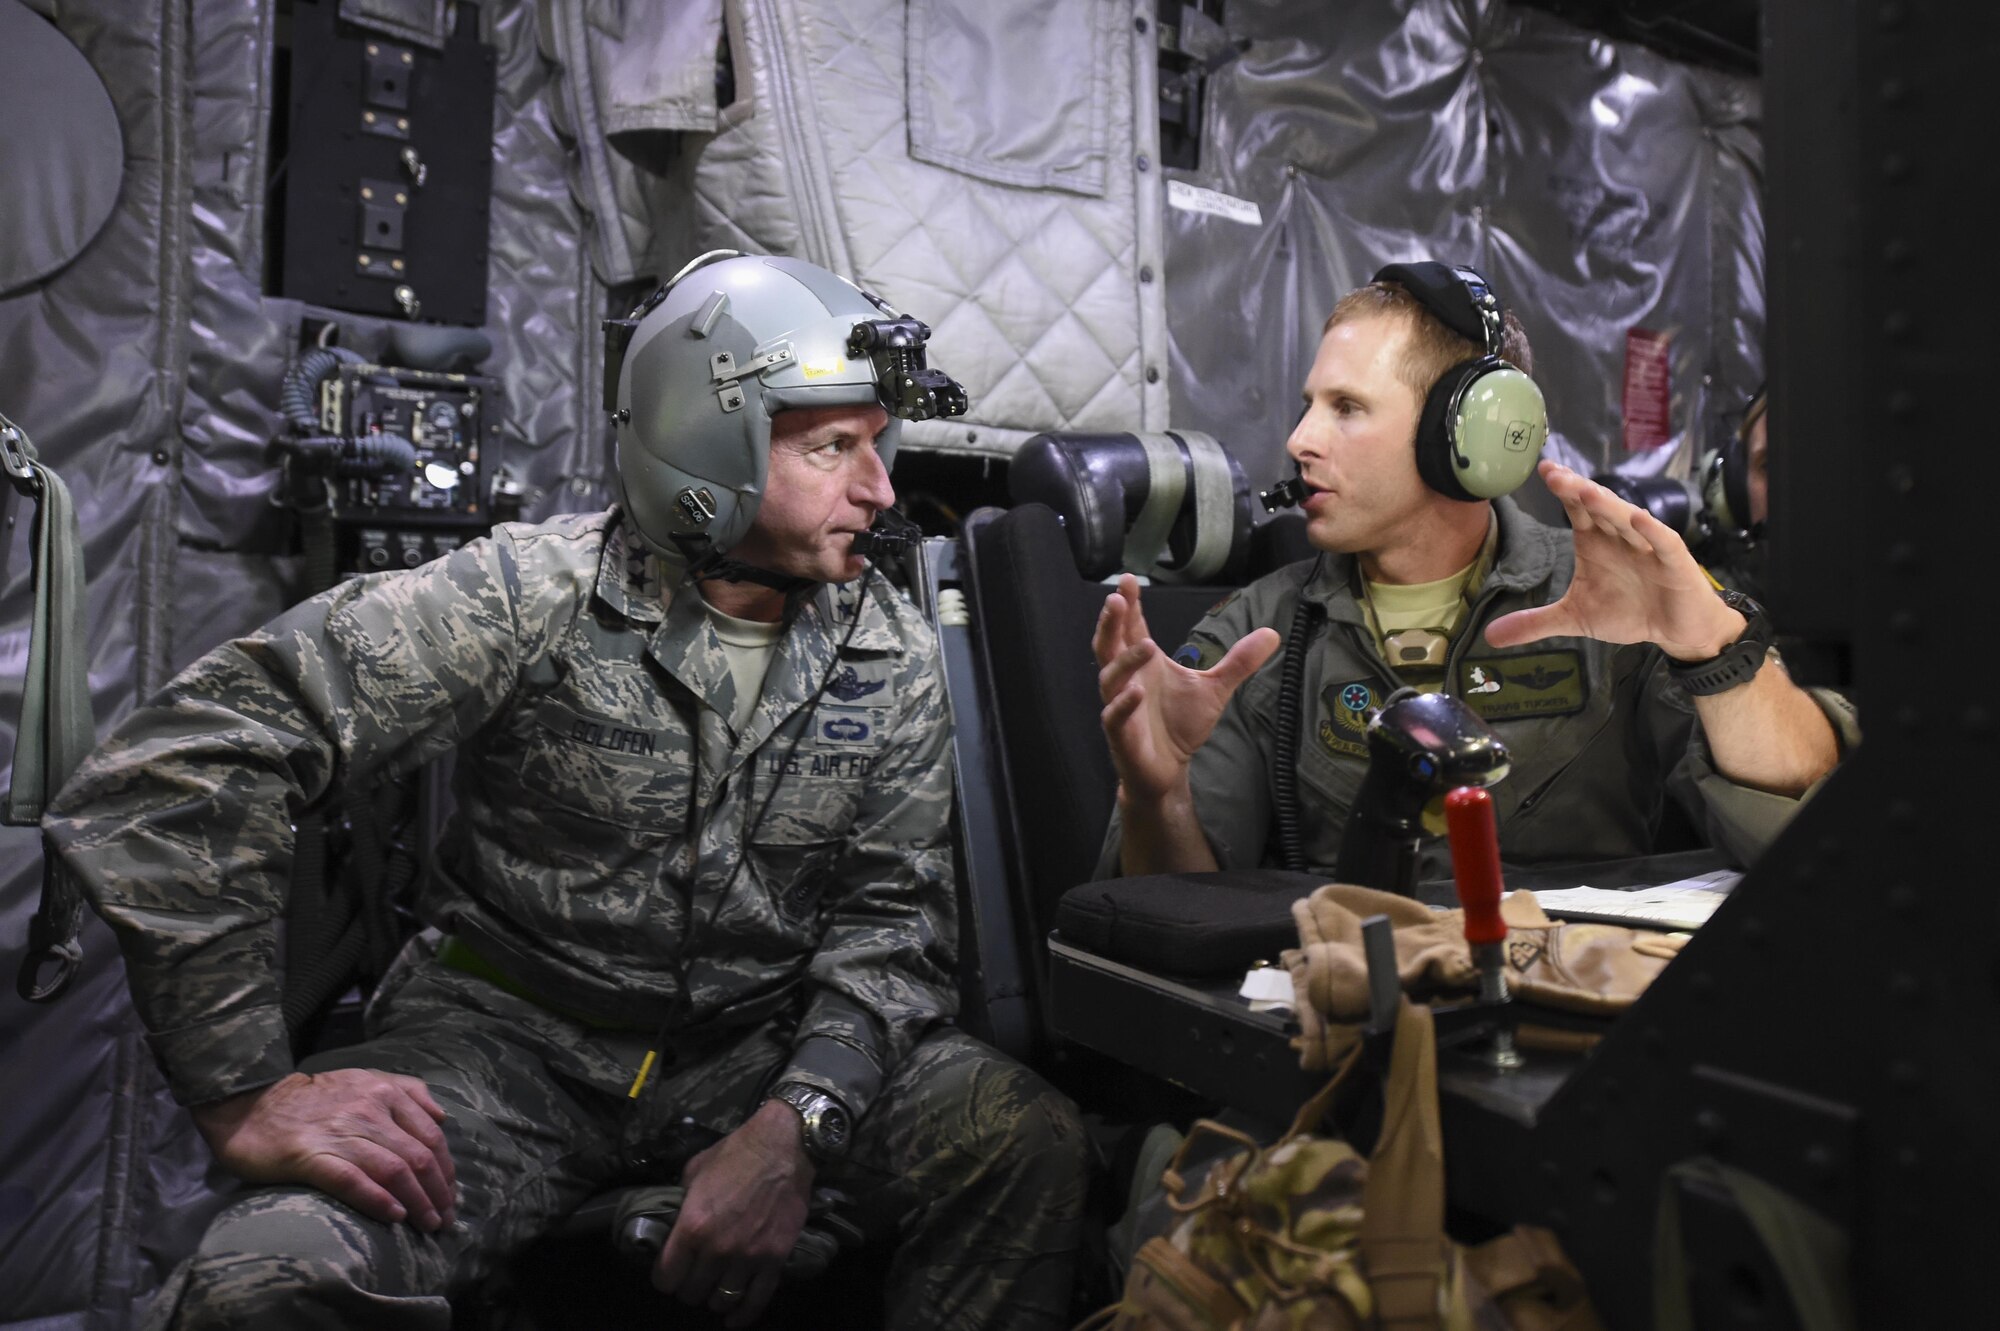 Maj. Travis Tucker, fire control officer with the 4th Special Operations Squadron, explains an AC-130U Spooky gunship’s weapons systems to Air Force Chief of Staff Gen. David L. Goldfein during Spooky mission orientation flight at Hurlburt Field, Fla., Oct. 19, 2016. Goldfein was the keynote speaker at the Special Tactics Memorial dedication ceremony at the Hurlburt Field Air Park. During their visit, Goldfein and his wife, Dawn, met with AFSOC, 505th Command and Control Wing, and base leadership and personnel. (U.S. Air Force photo by Senior Airman Jeff Parkinson)